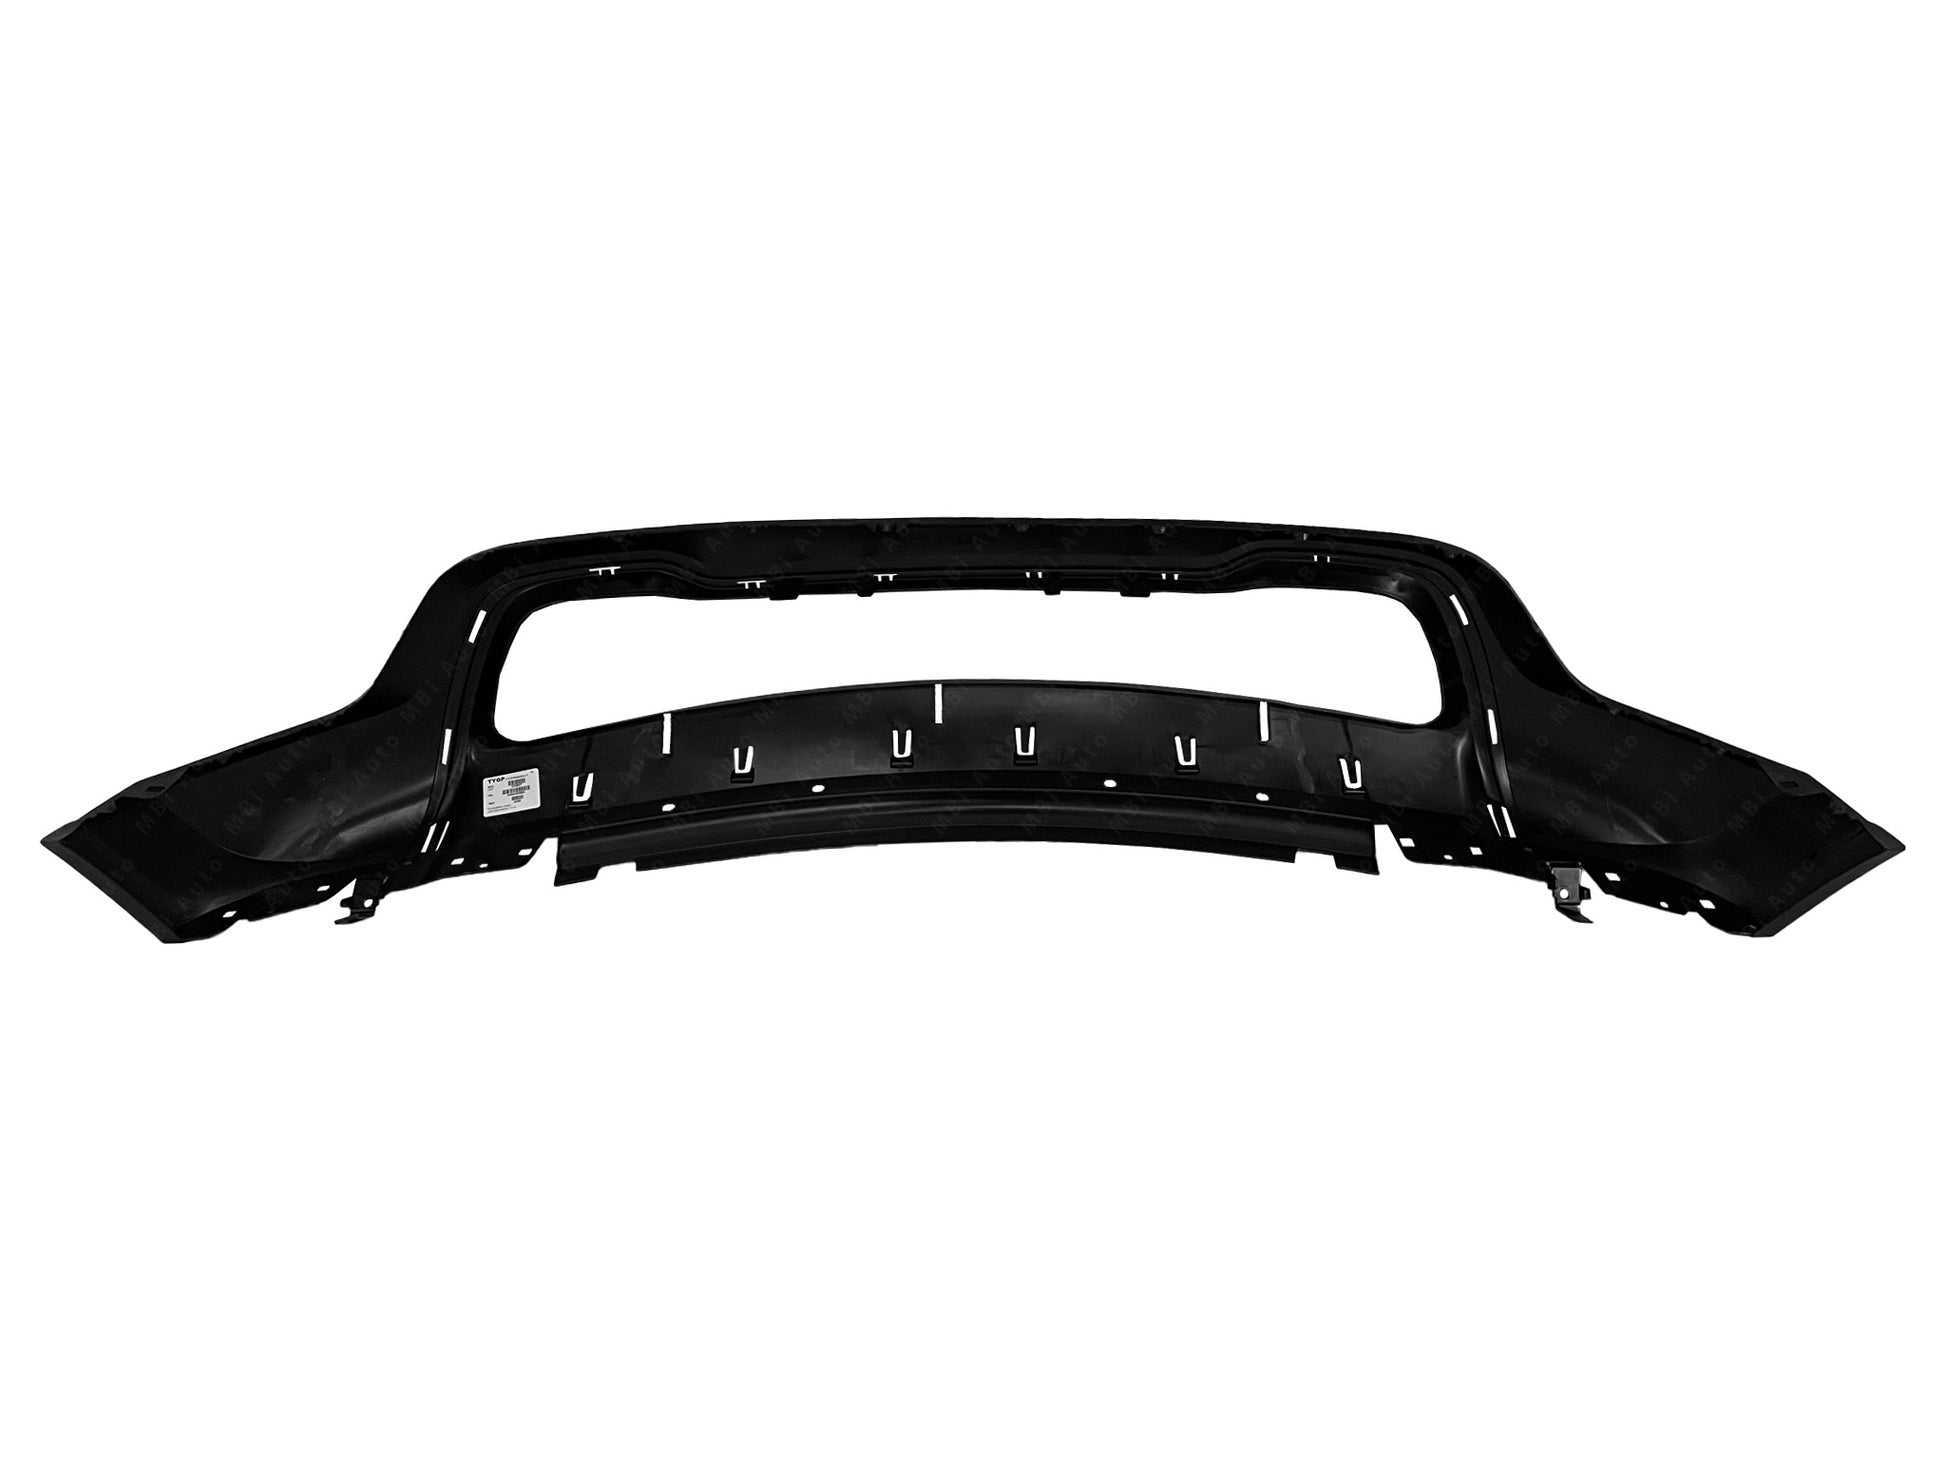 Jeep Grand Cherokee 2014 - 2016 Front Textured Lower Bumper Cover 14 - 16 CH1015114 Bumper-King